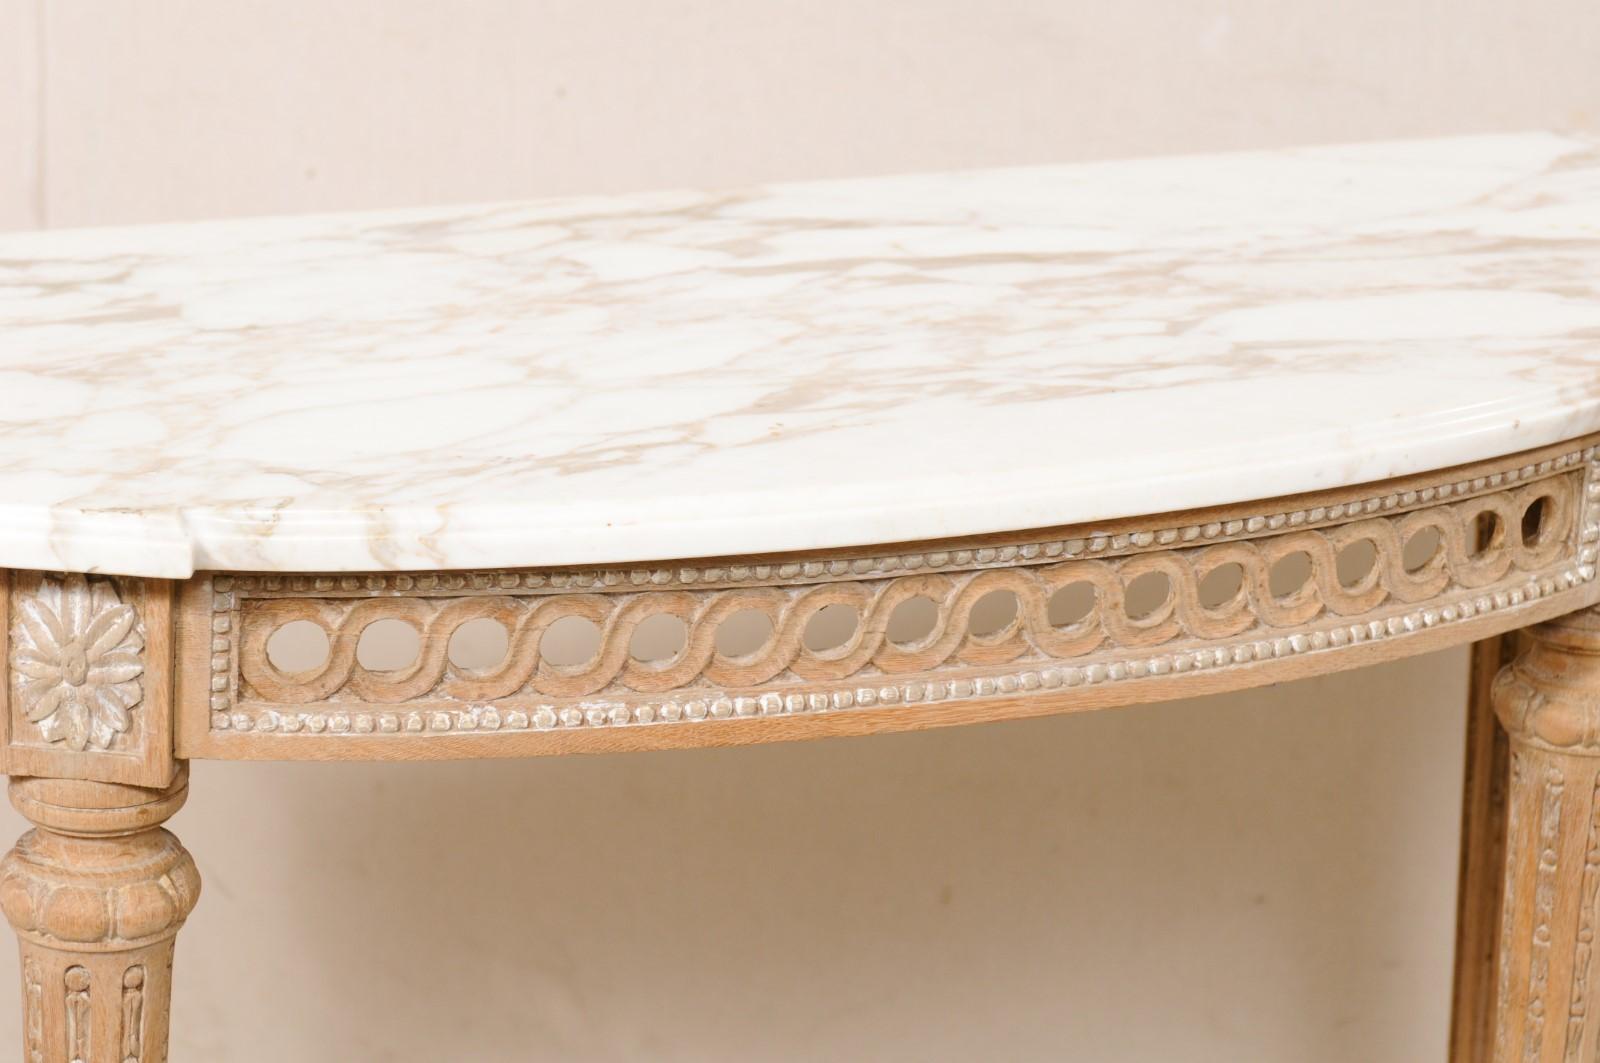 20th Century French Neoclassic Style Marble-Top Console Table W/Nice Urn Finial at Underside For Sale